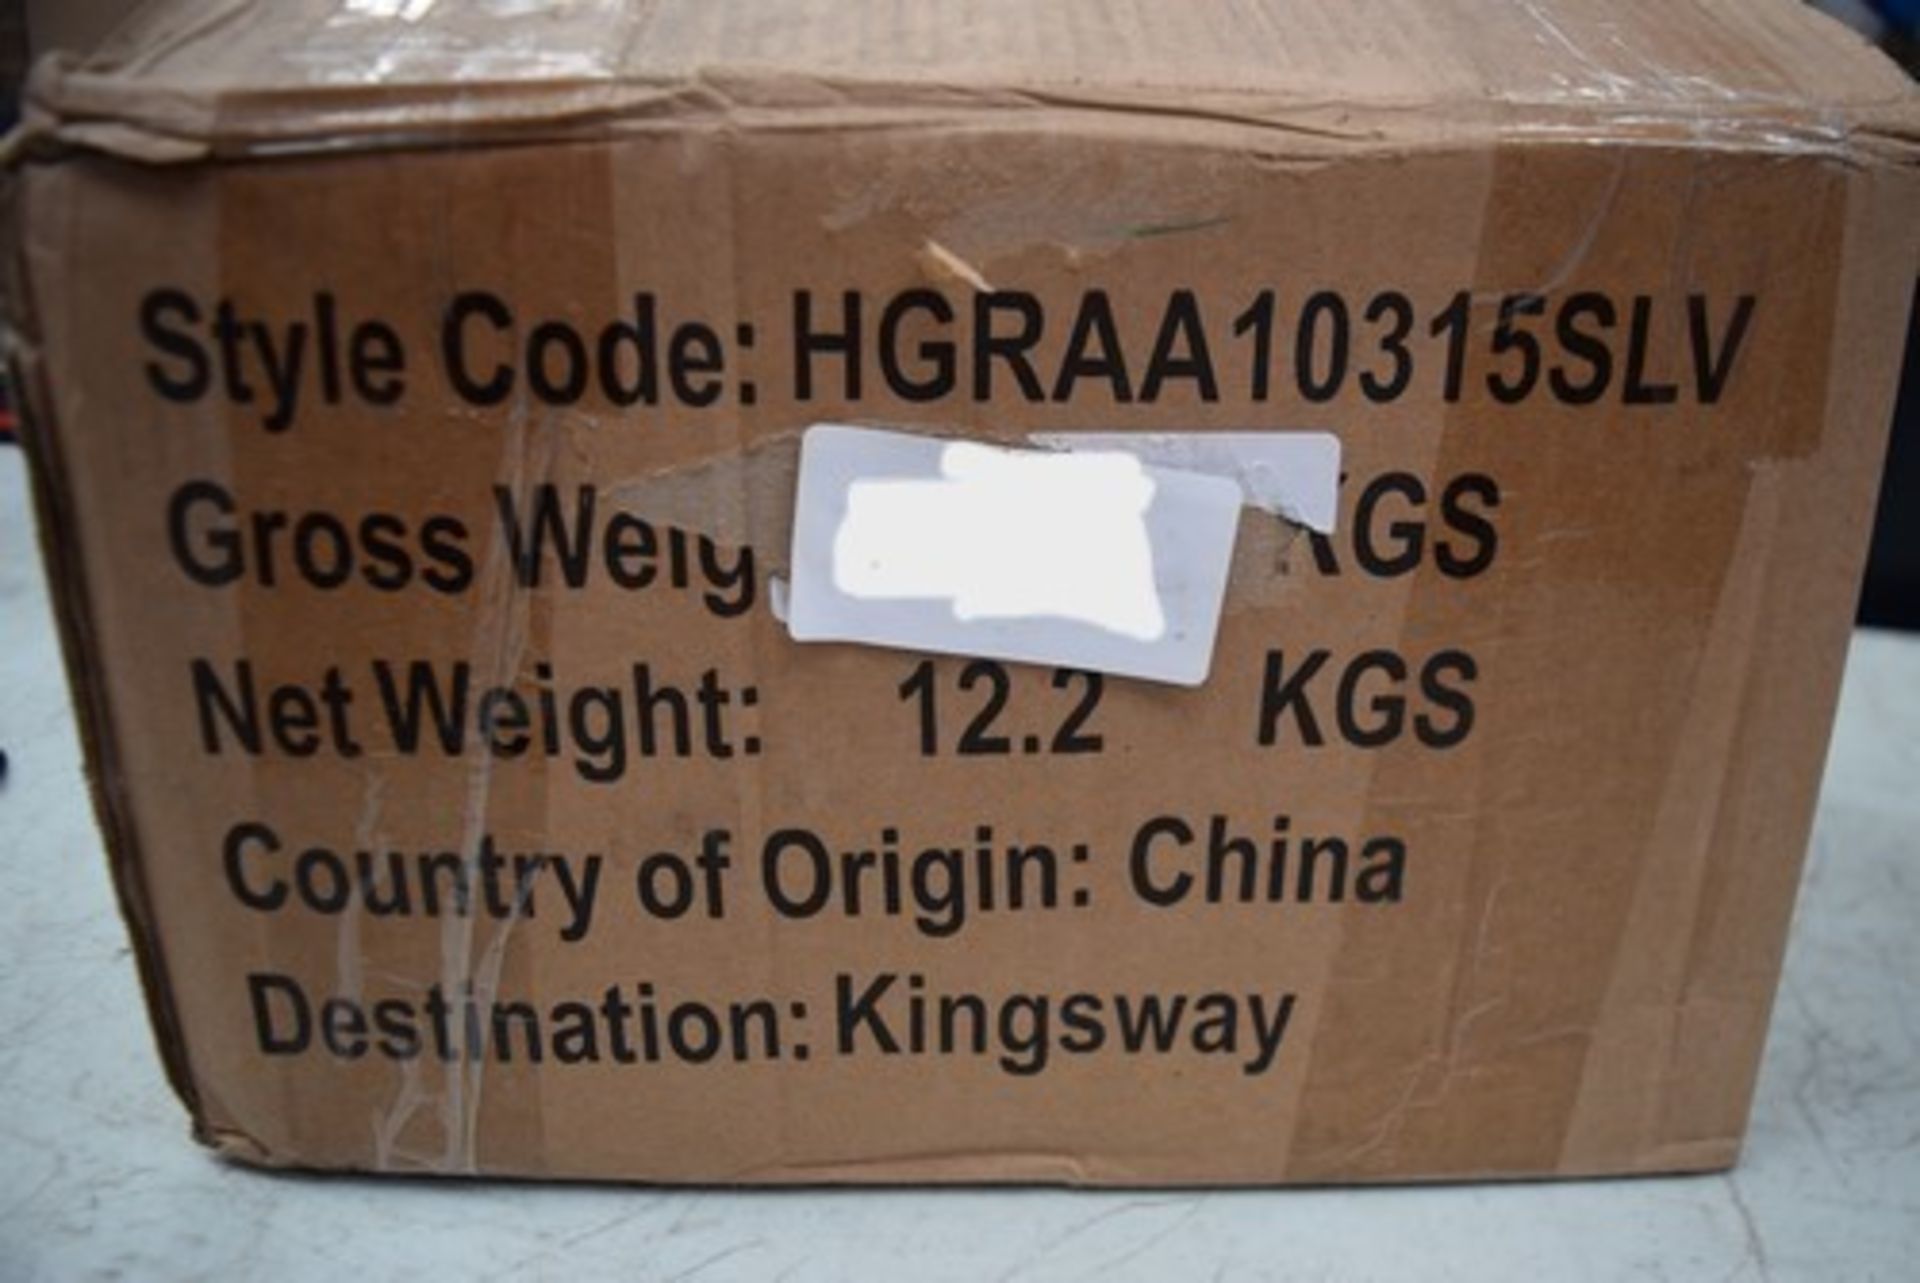 2 x boxes, each containing 60 x packs of 10 Higear 7" round wire pegs, - new in pack (adjacent S/R) - Image 3 of 3